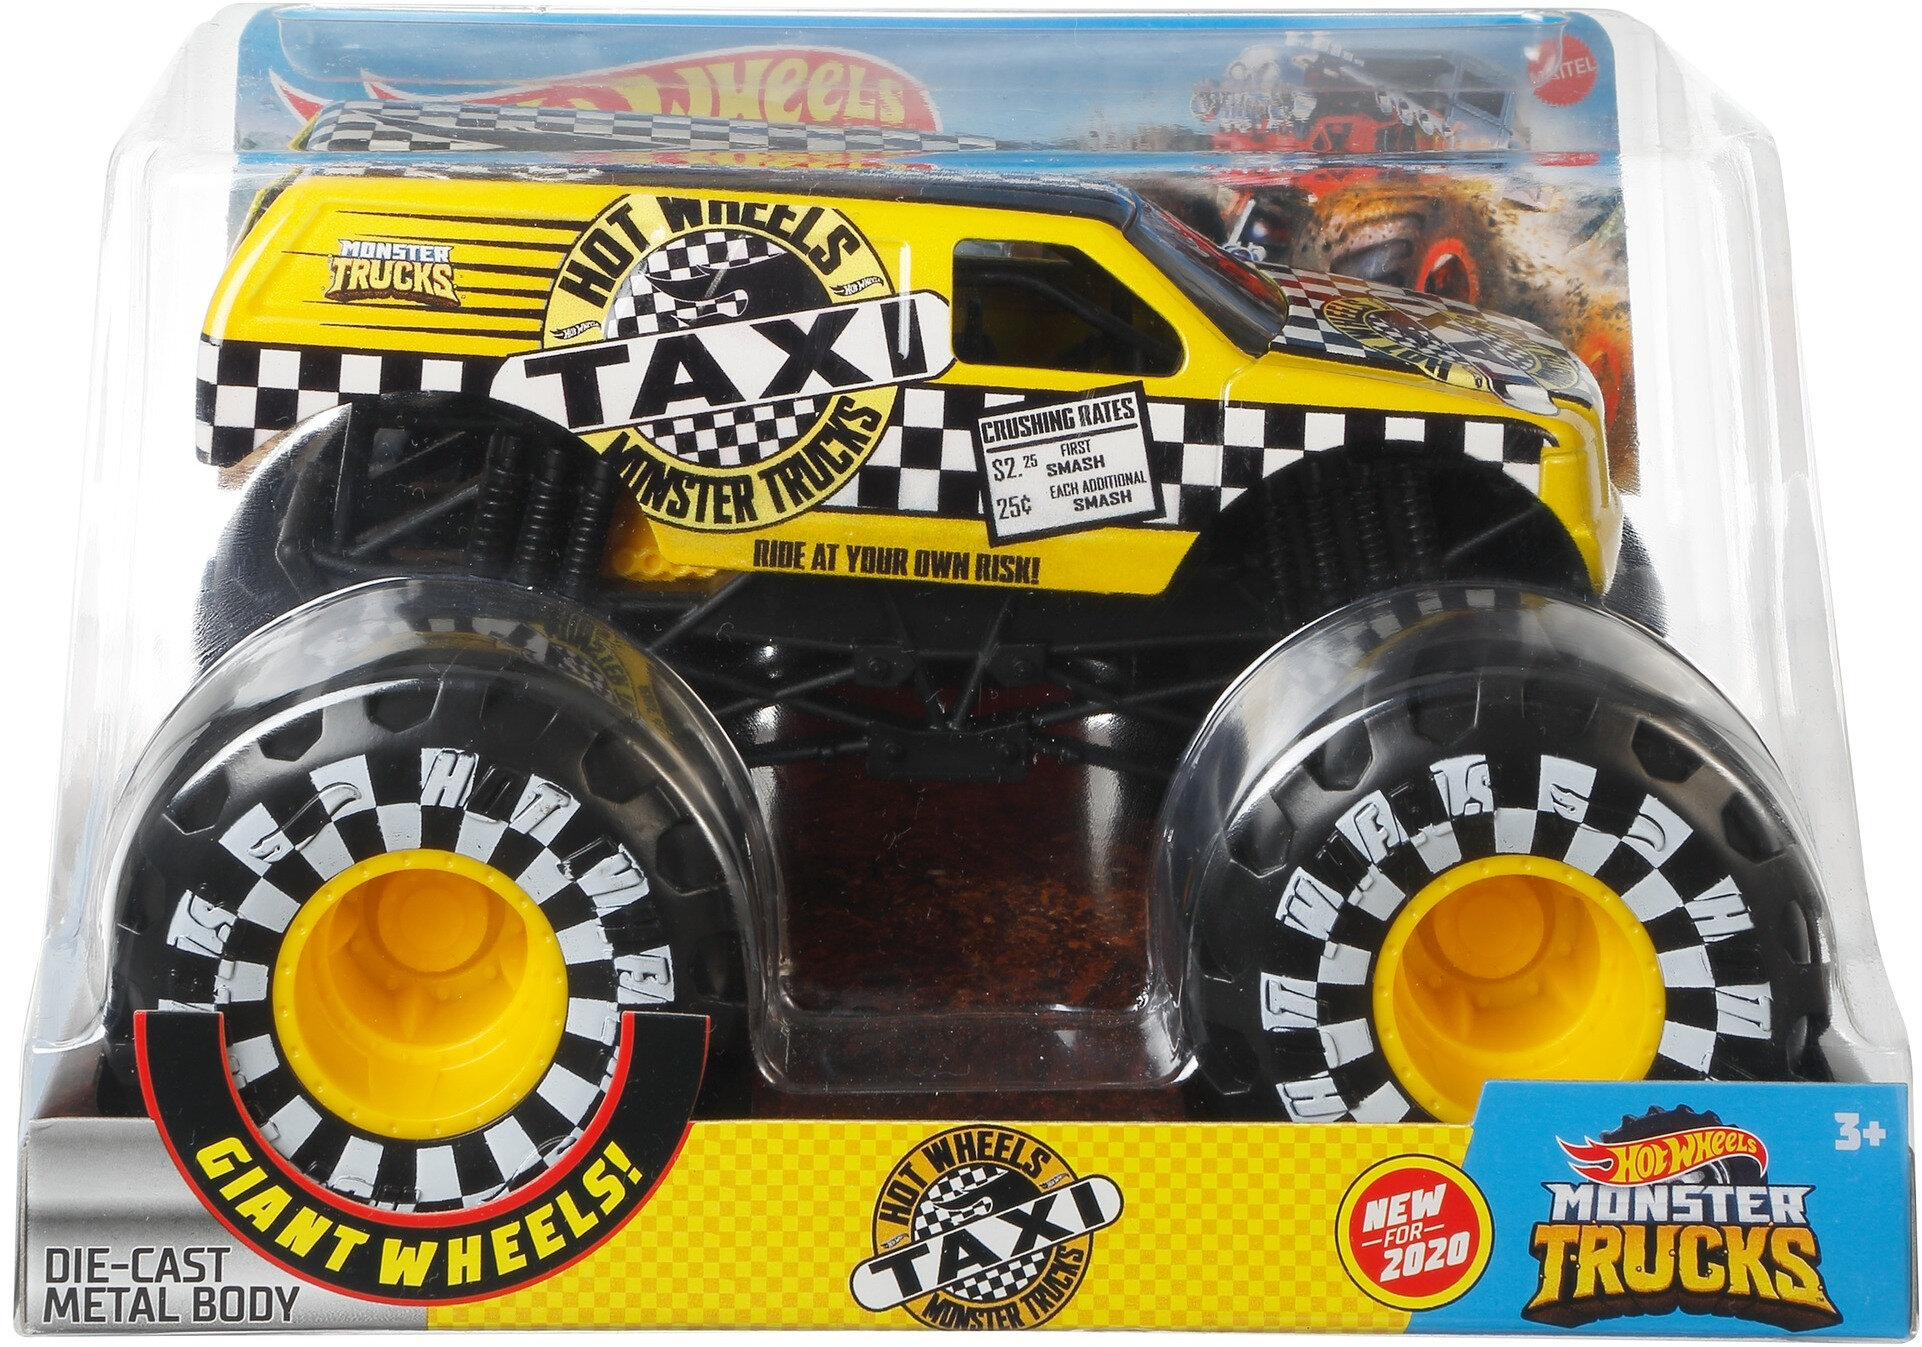 Hot Wheels Monster Trucks Taxi 1:24 Scale Vehicle - image 5 of 5